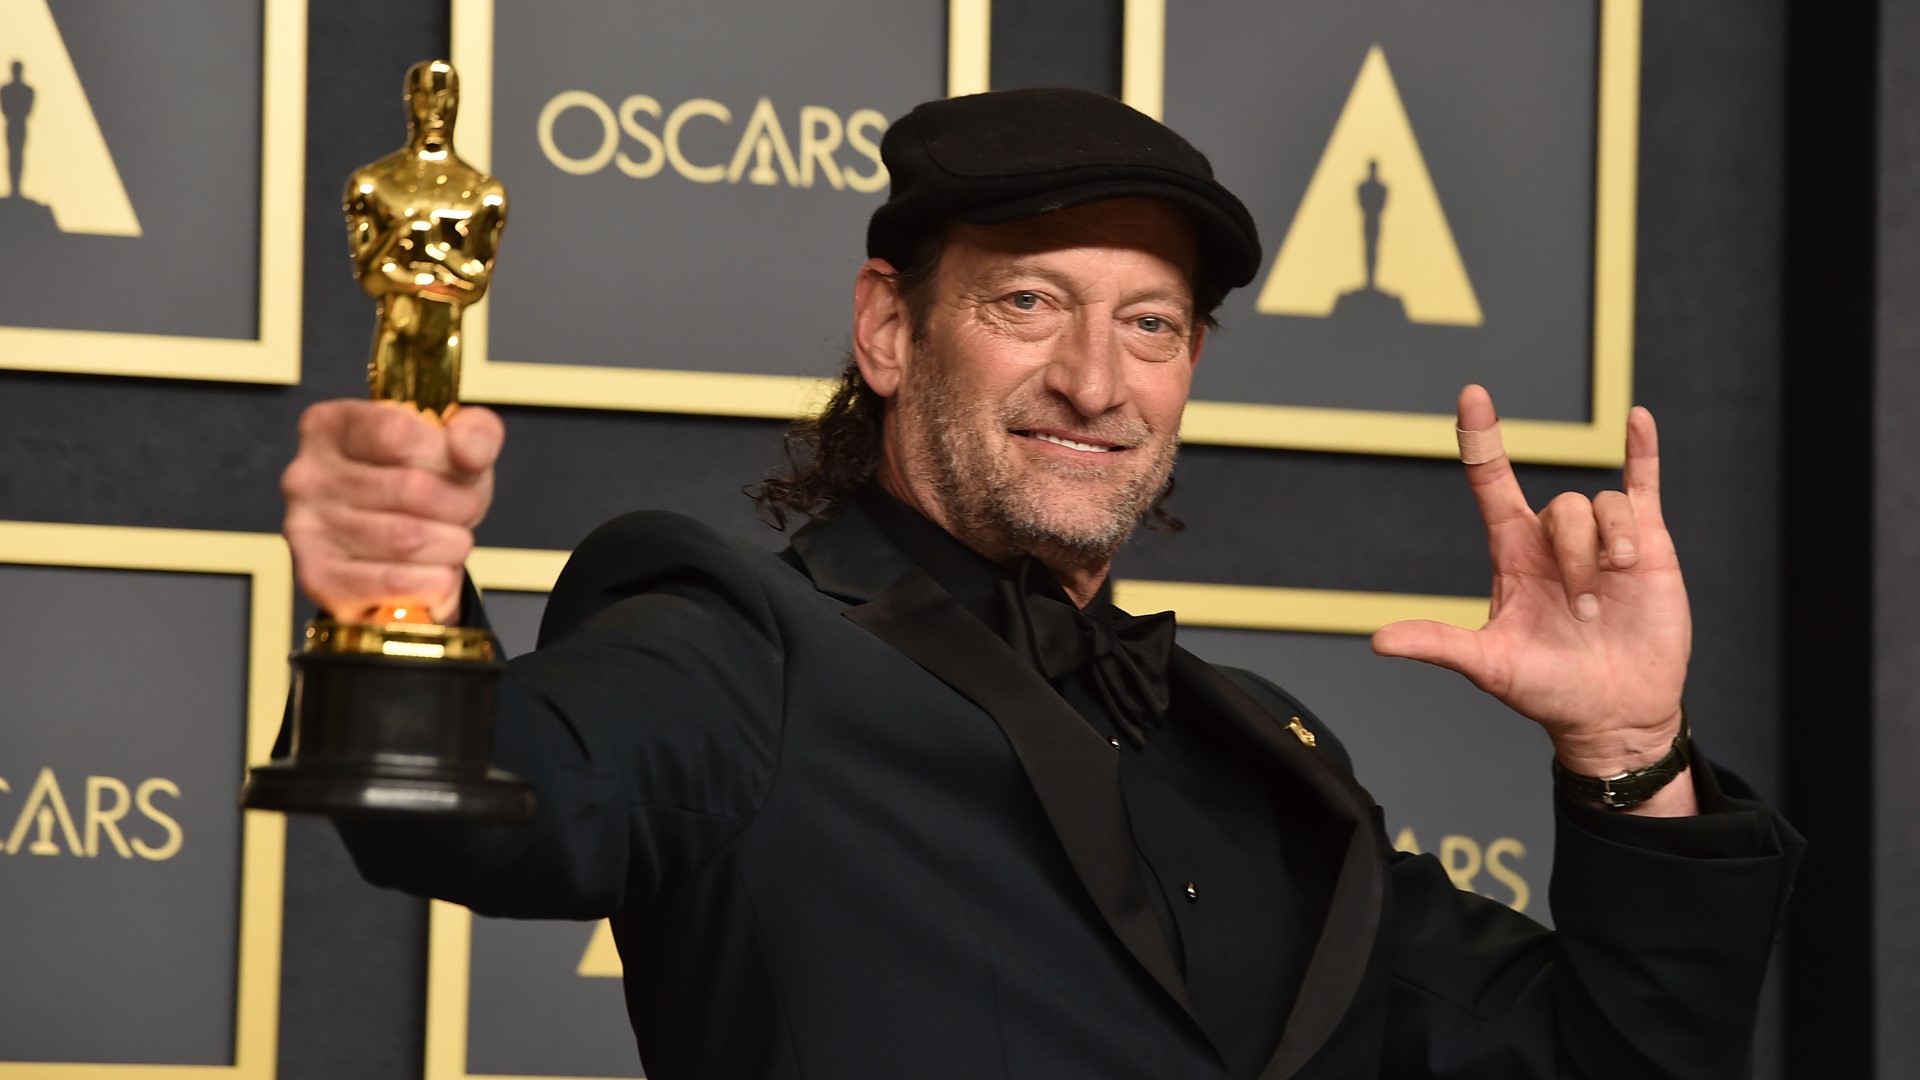 2022 Oscars: Troy Kotsur takes home Best Supporting Actor while 'CODA' pulls off an underdog win to take home Best Picture.